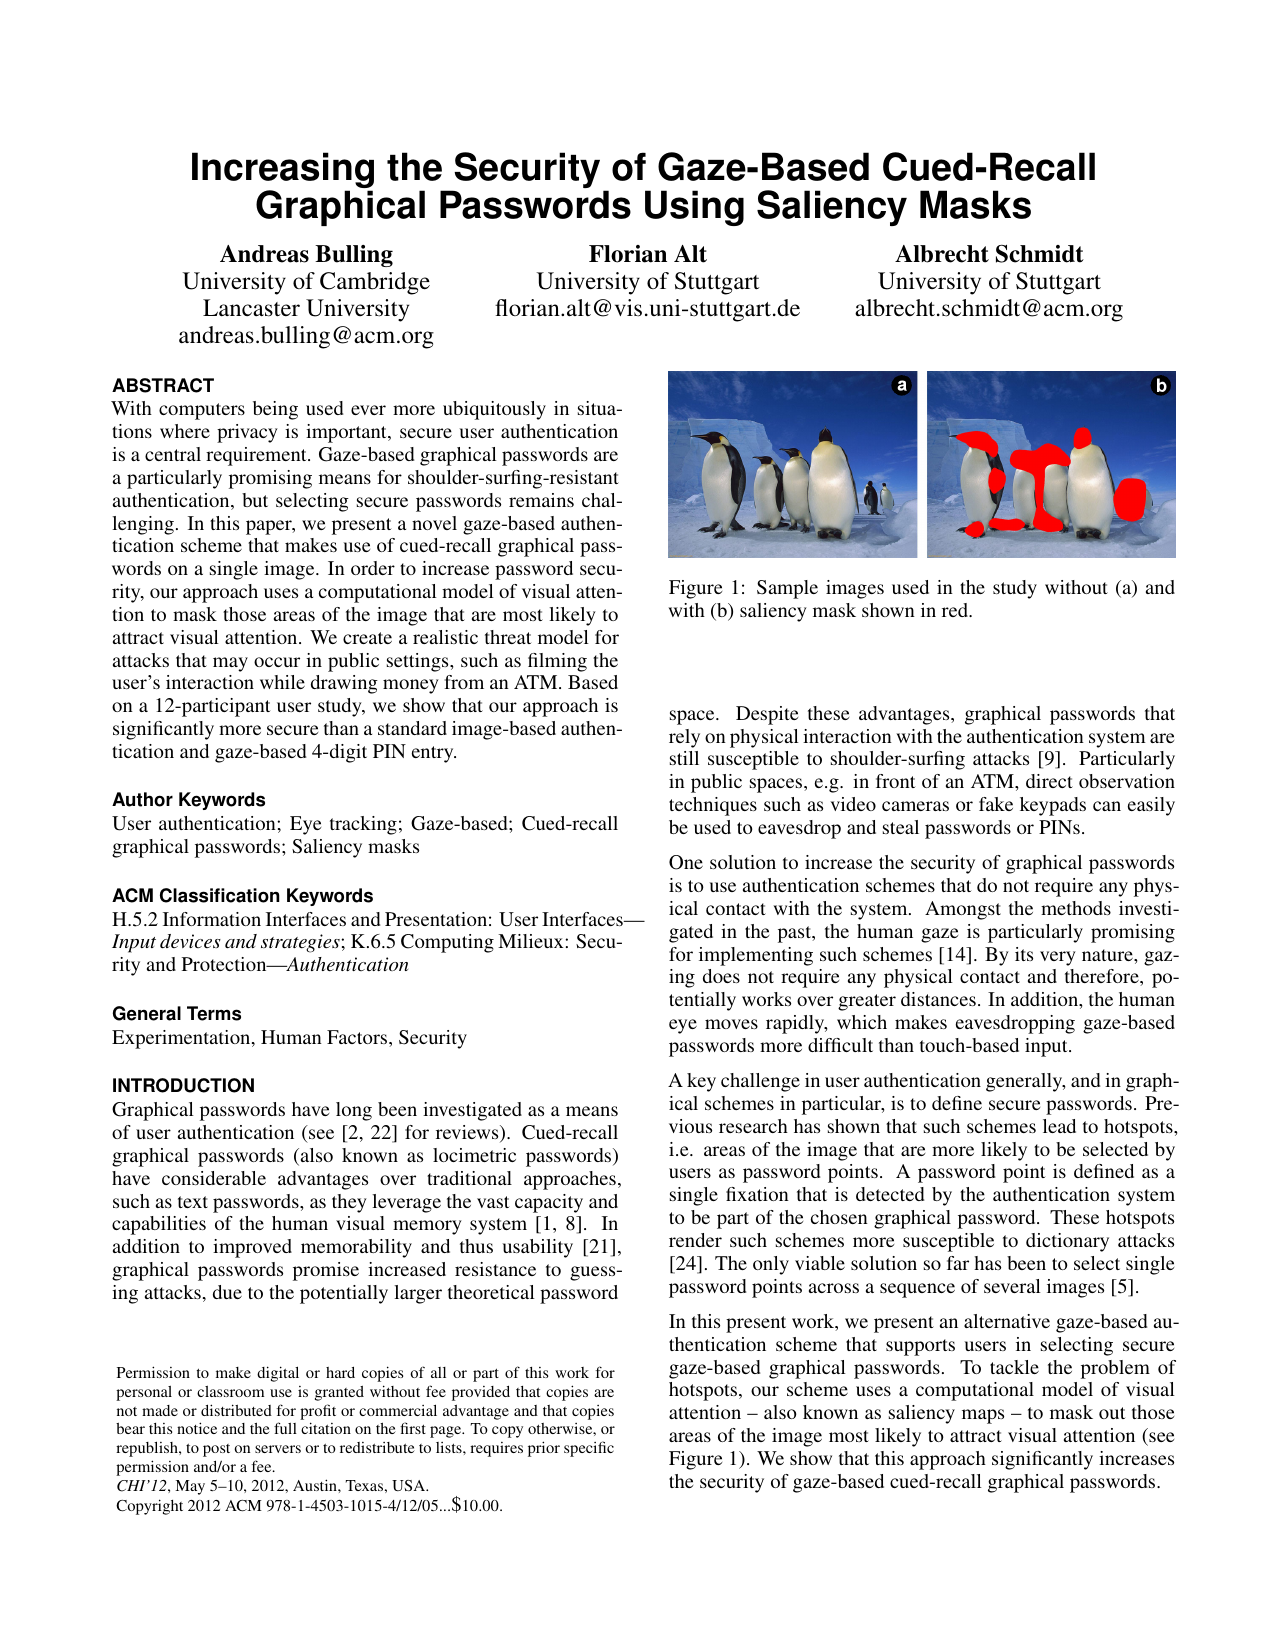 Increasing the Security of Gaze-Based Cued-Recall Graphical Passwords Using Saliency Masks